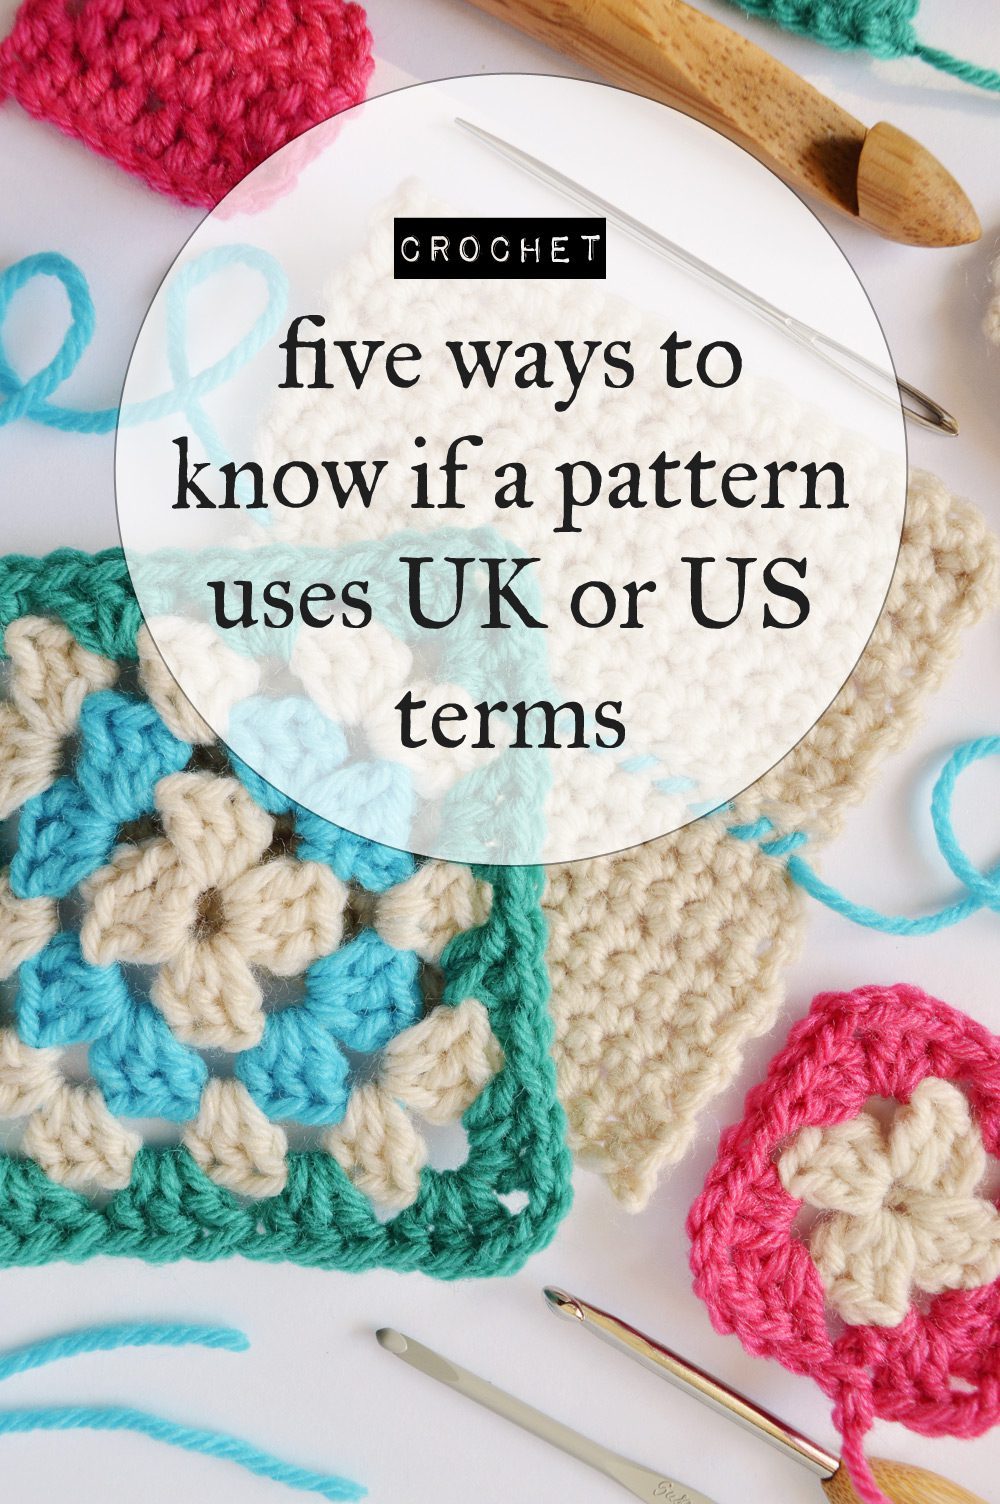 How to know if a crochet pattern uses UK or US terms @craftingfingers